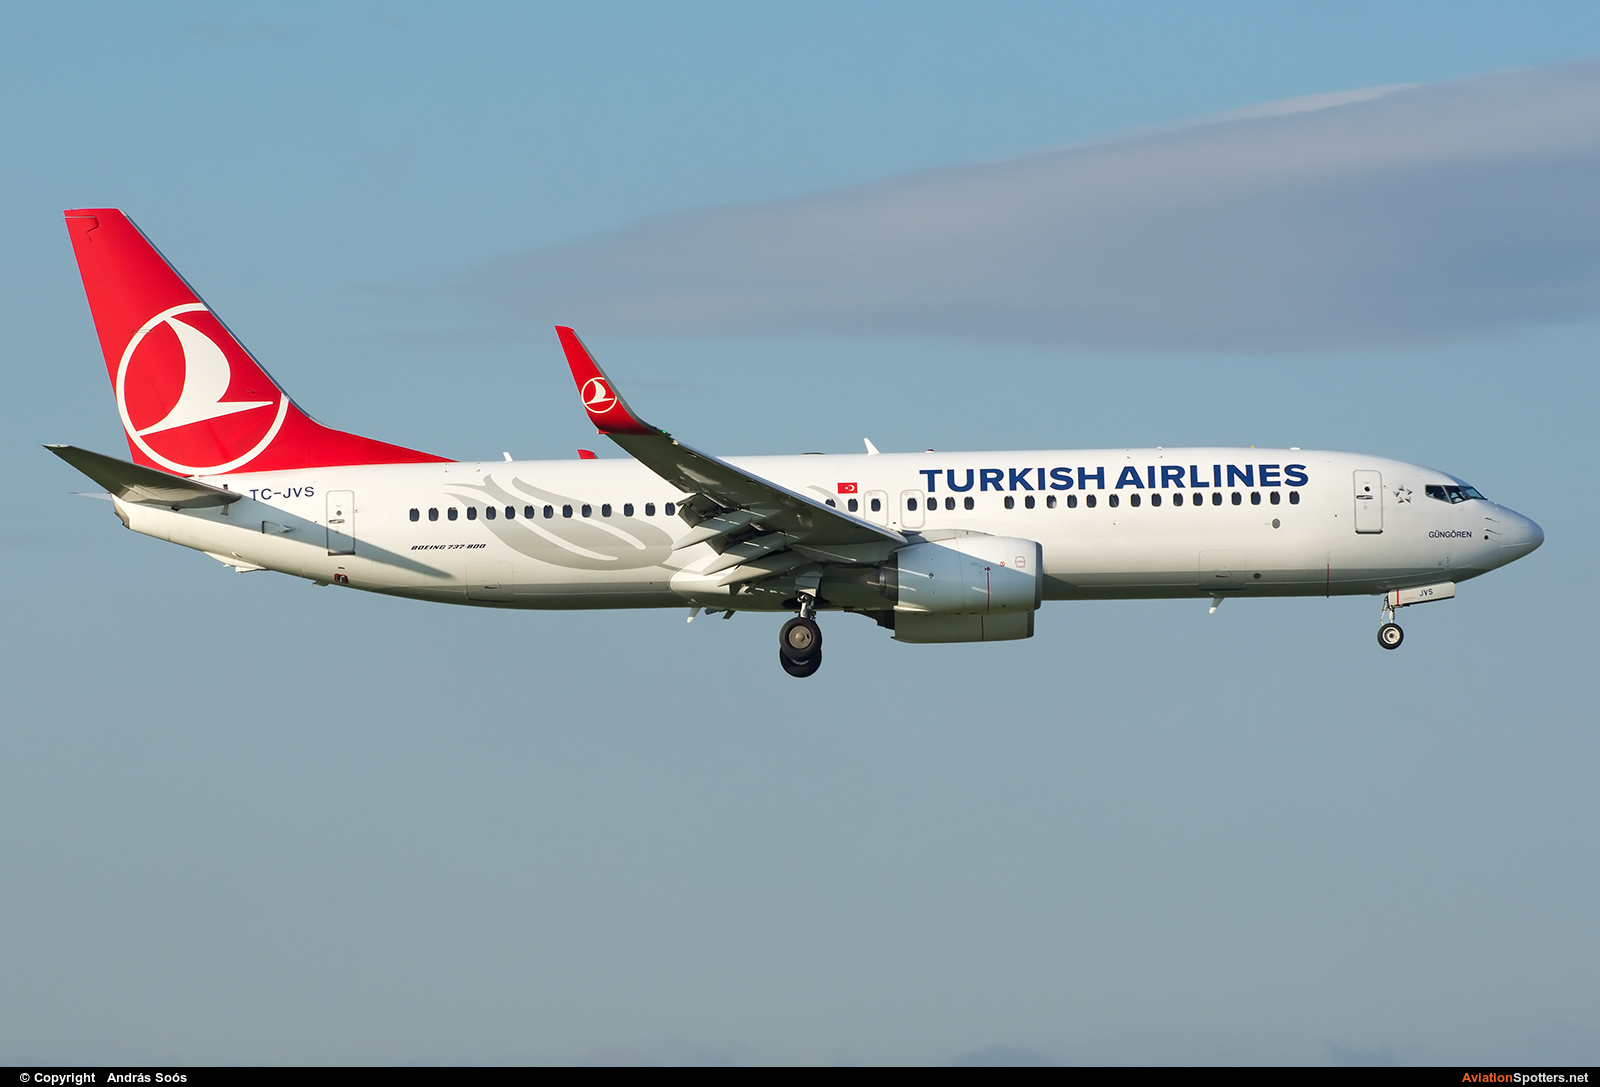 Turkish Airlines  -  737-800  (TC-JVS) By András Soós (sas1965)